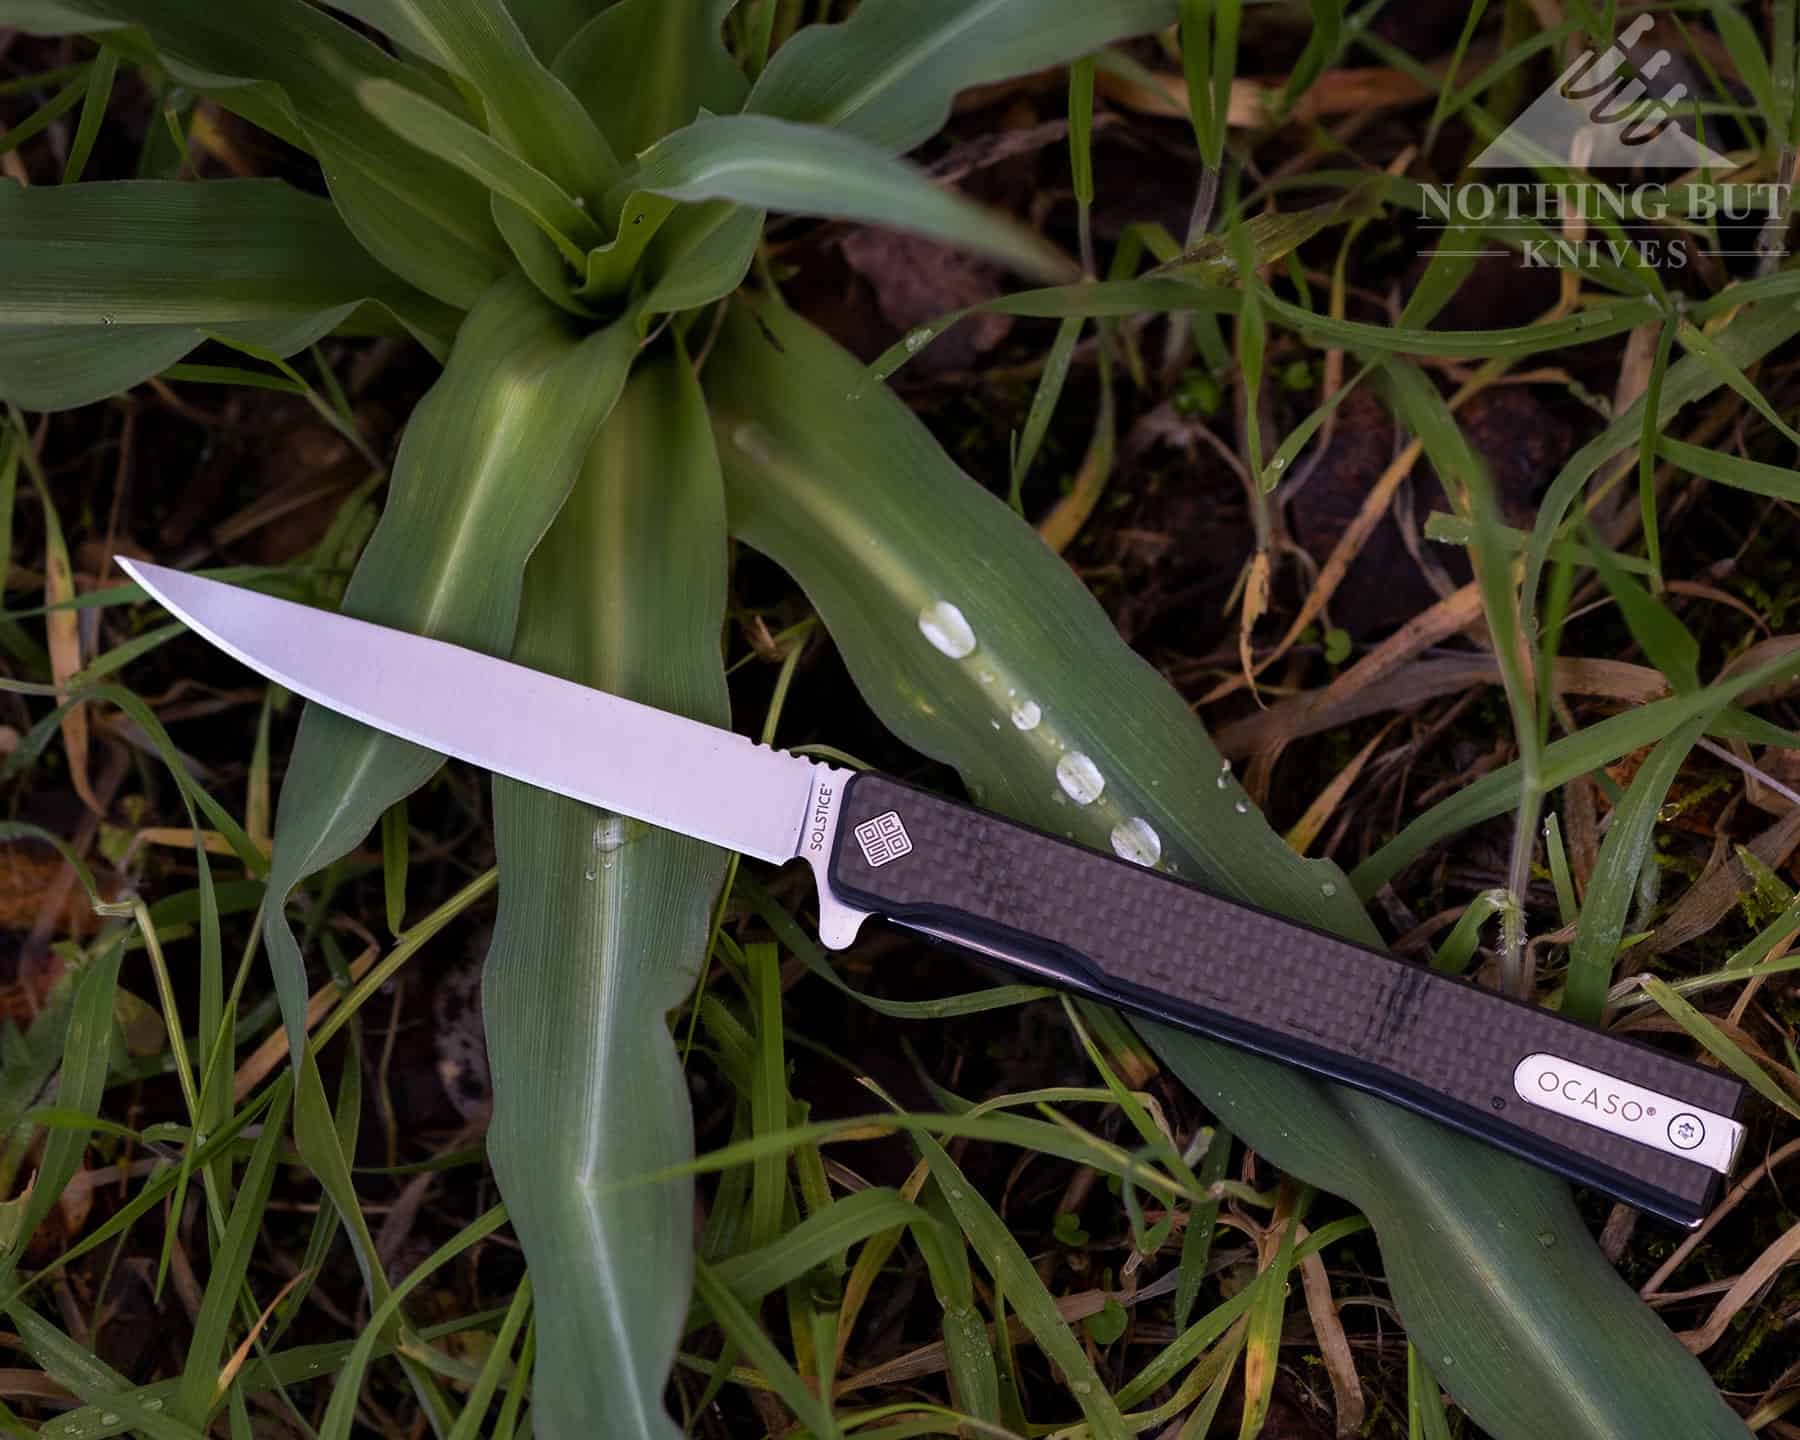 The Ocaso Solstice blade is thin, strong and sharp. 